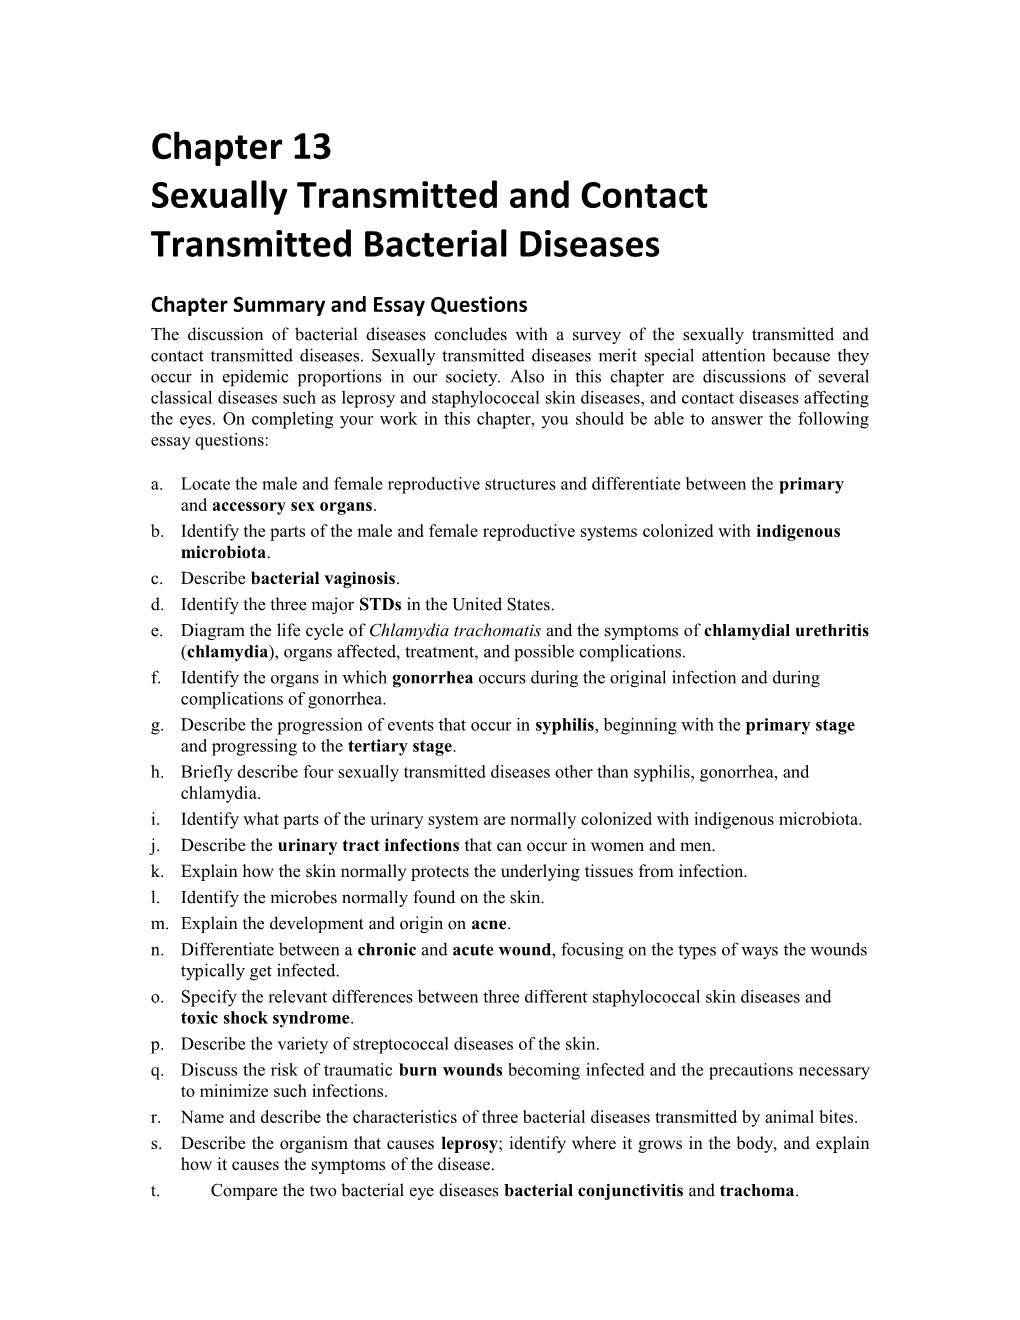 Sexually Transmitted and Contact Transmitted Bacterial Diseases